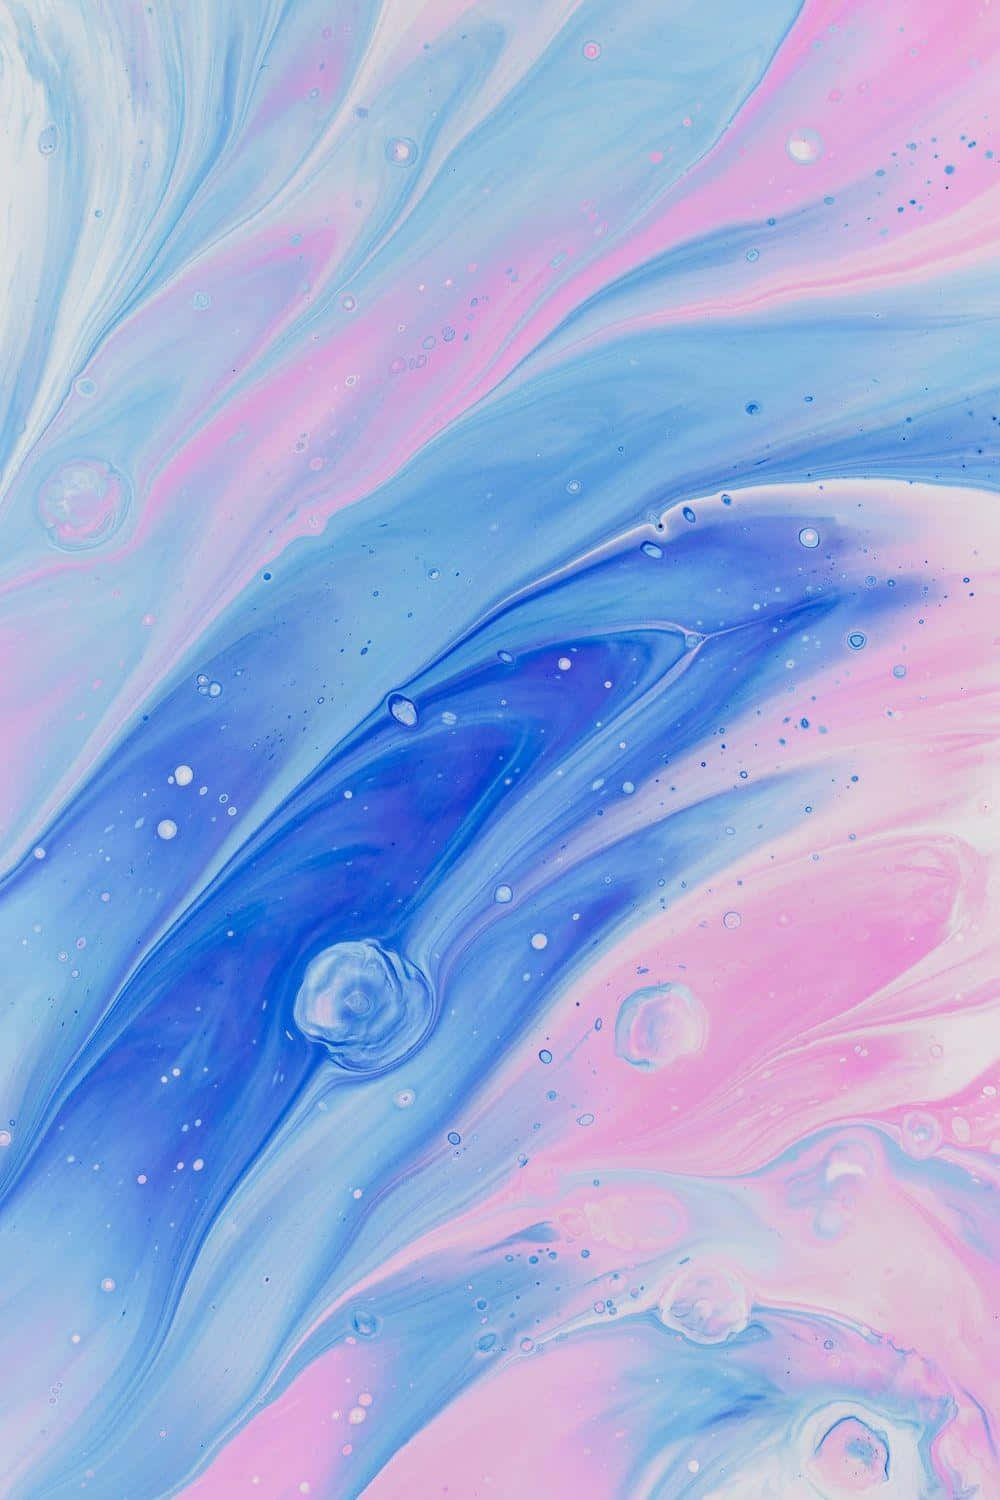 Swirling Pinkand Blue Abstract Wallpaper